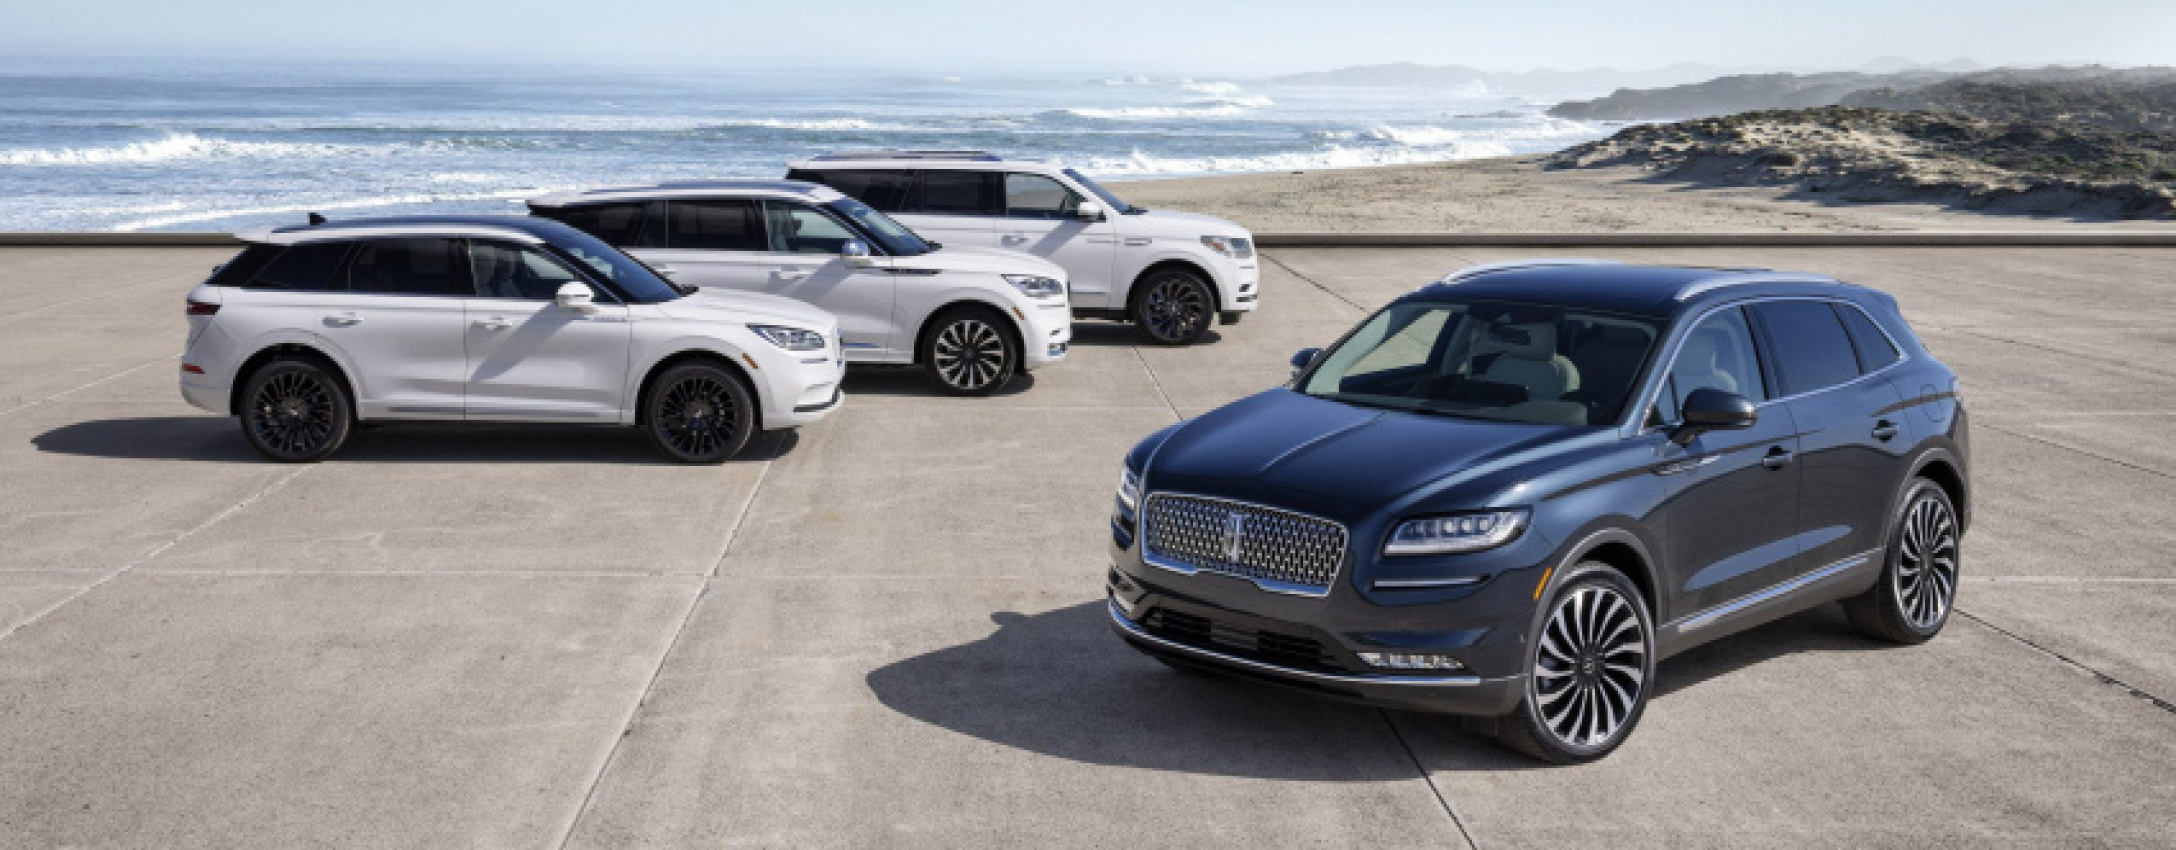 autos, cars, lincoln, luxury, lincoln to launch full slate of electric suvs by 2026: sources